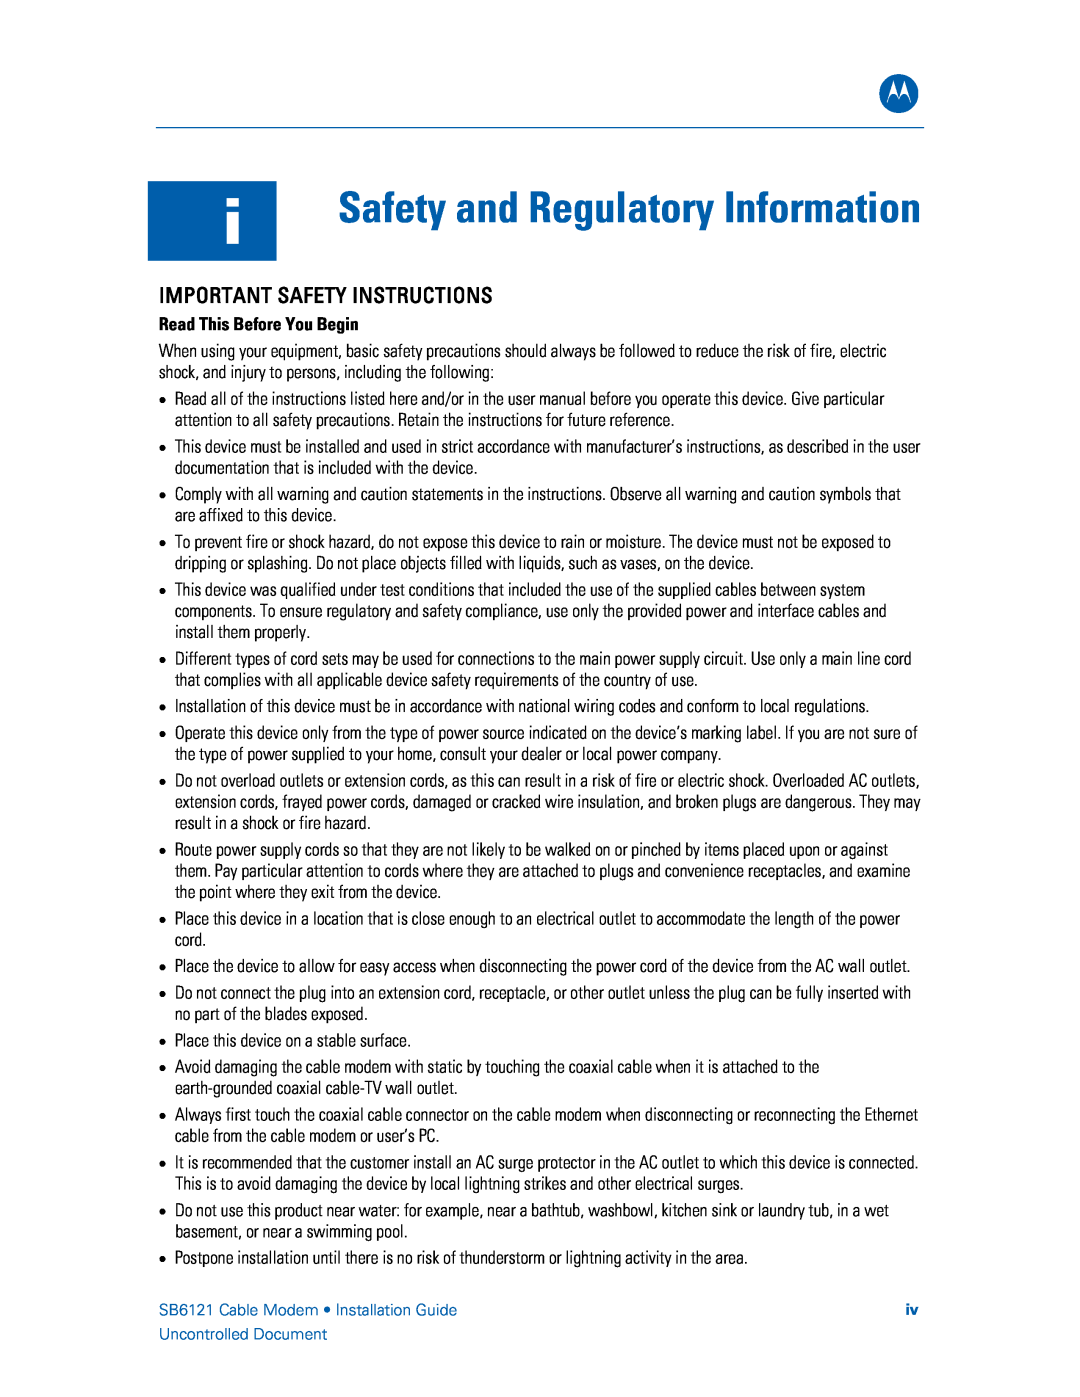 Motorola SB6121 manual i Safety and Regulatory Information, Important Safety Instructions, Read This Before You Begin 